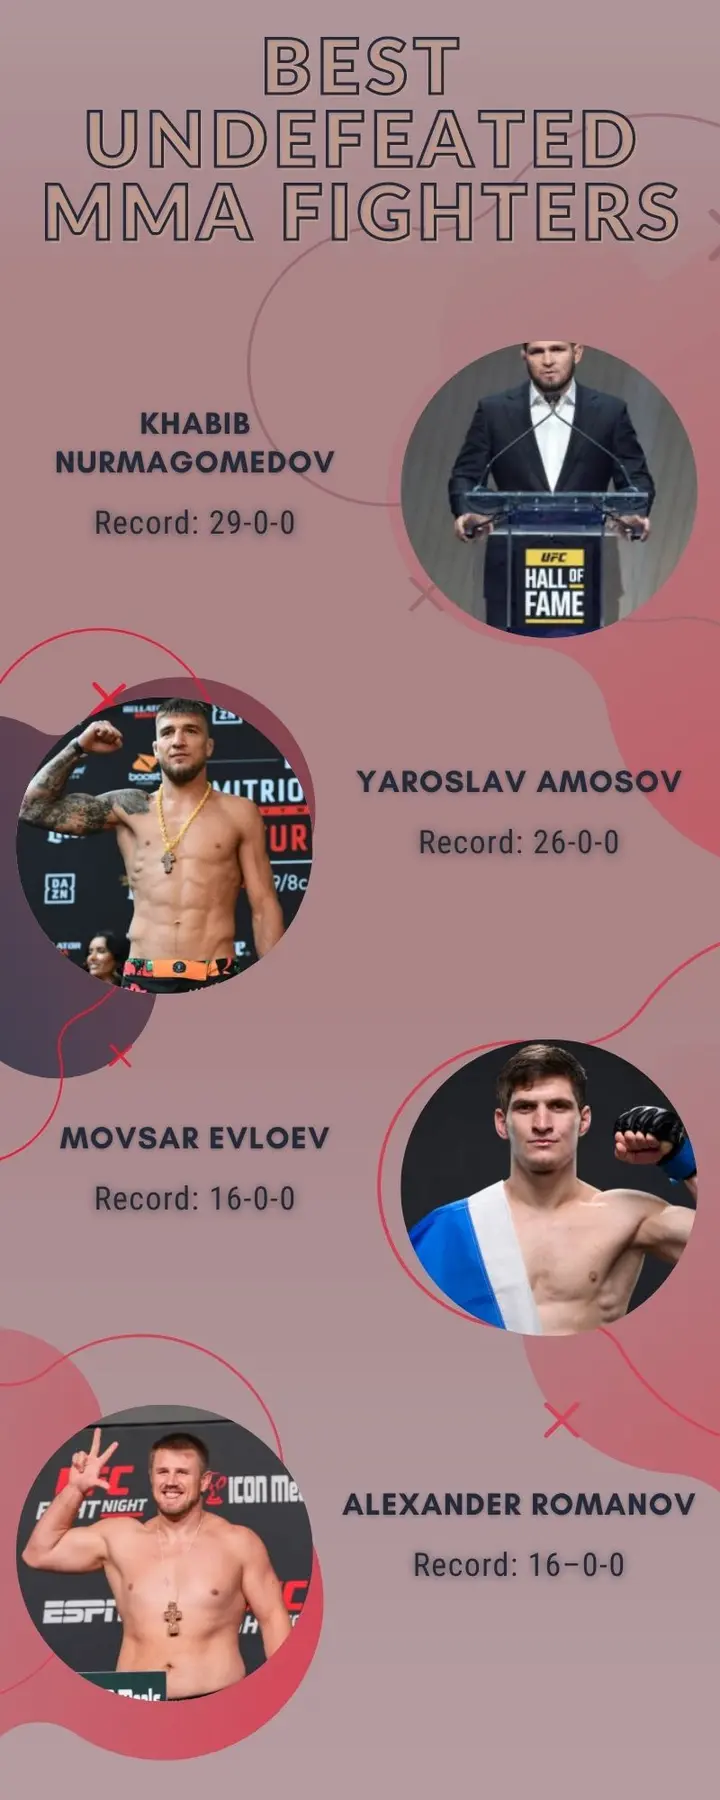 Best undefeated MMA fighters